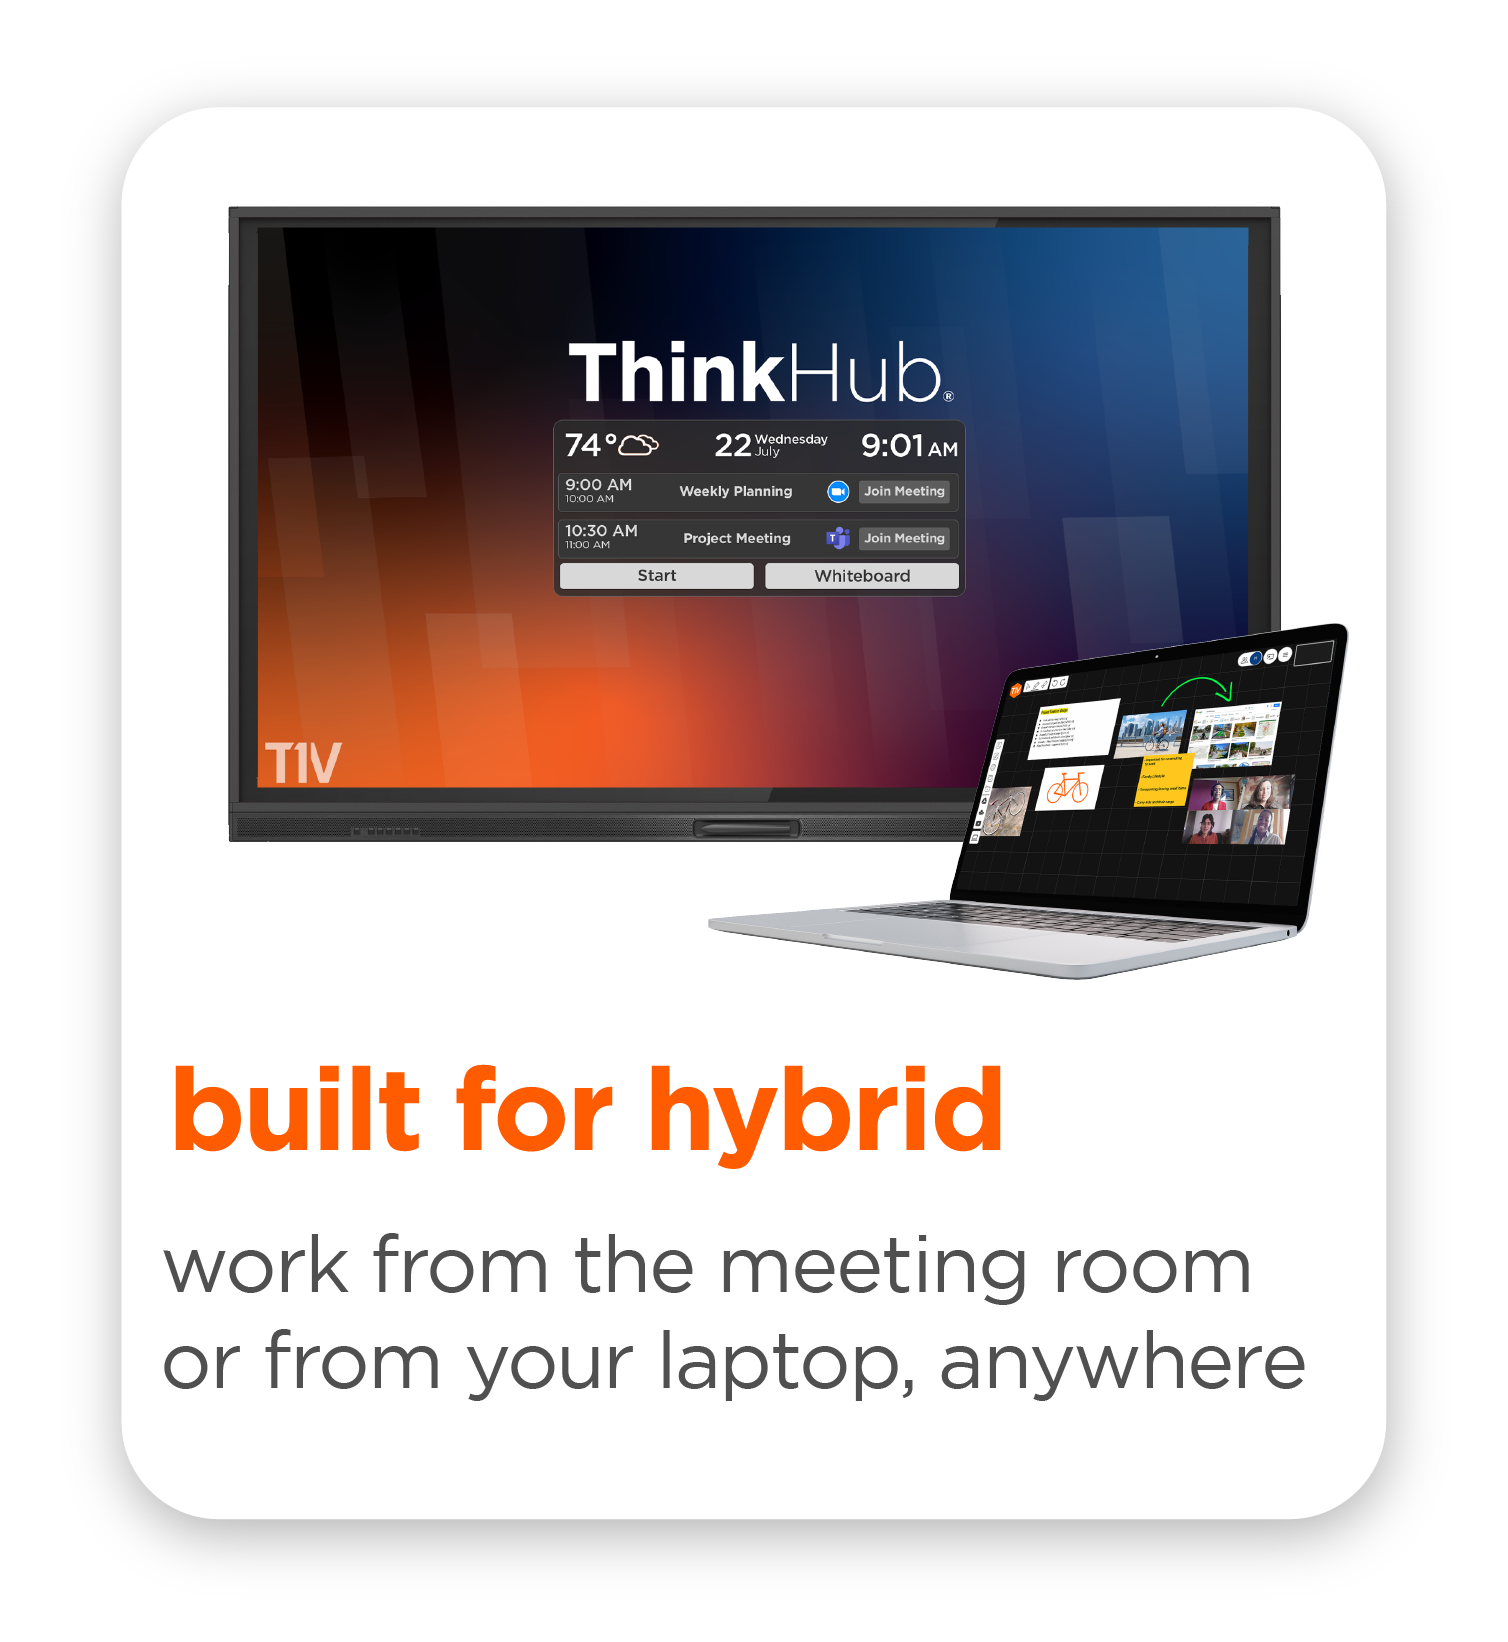 t1v-thinkhub-features-built-for-hybrid